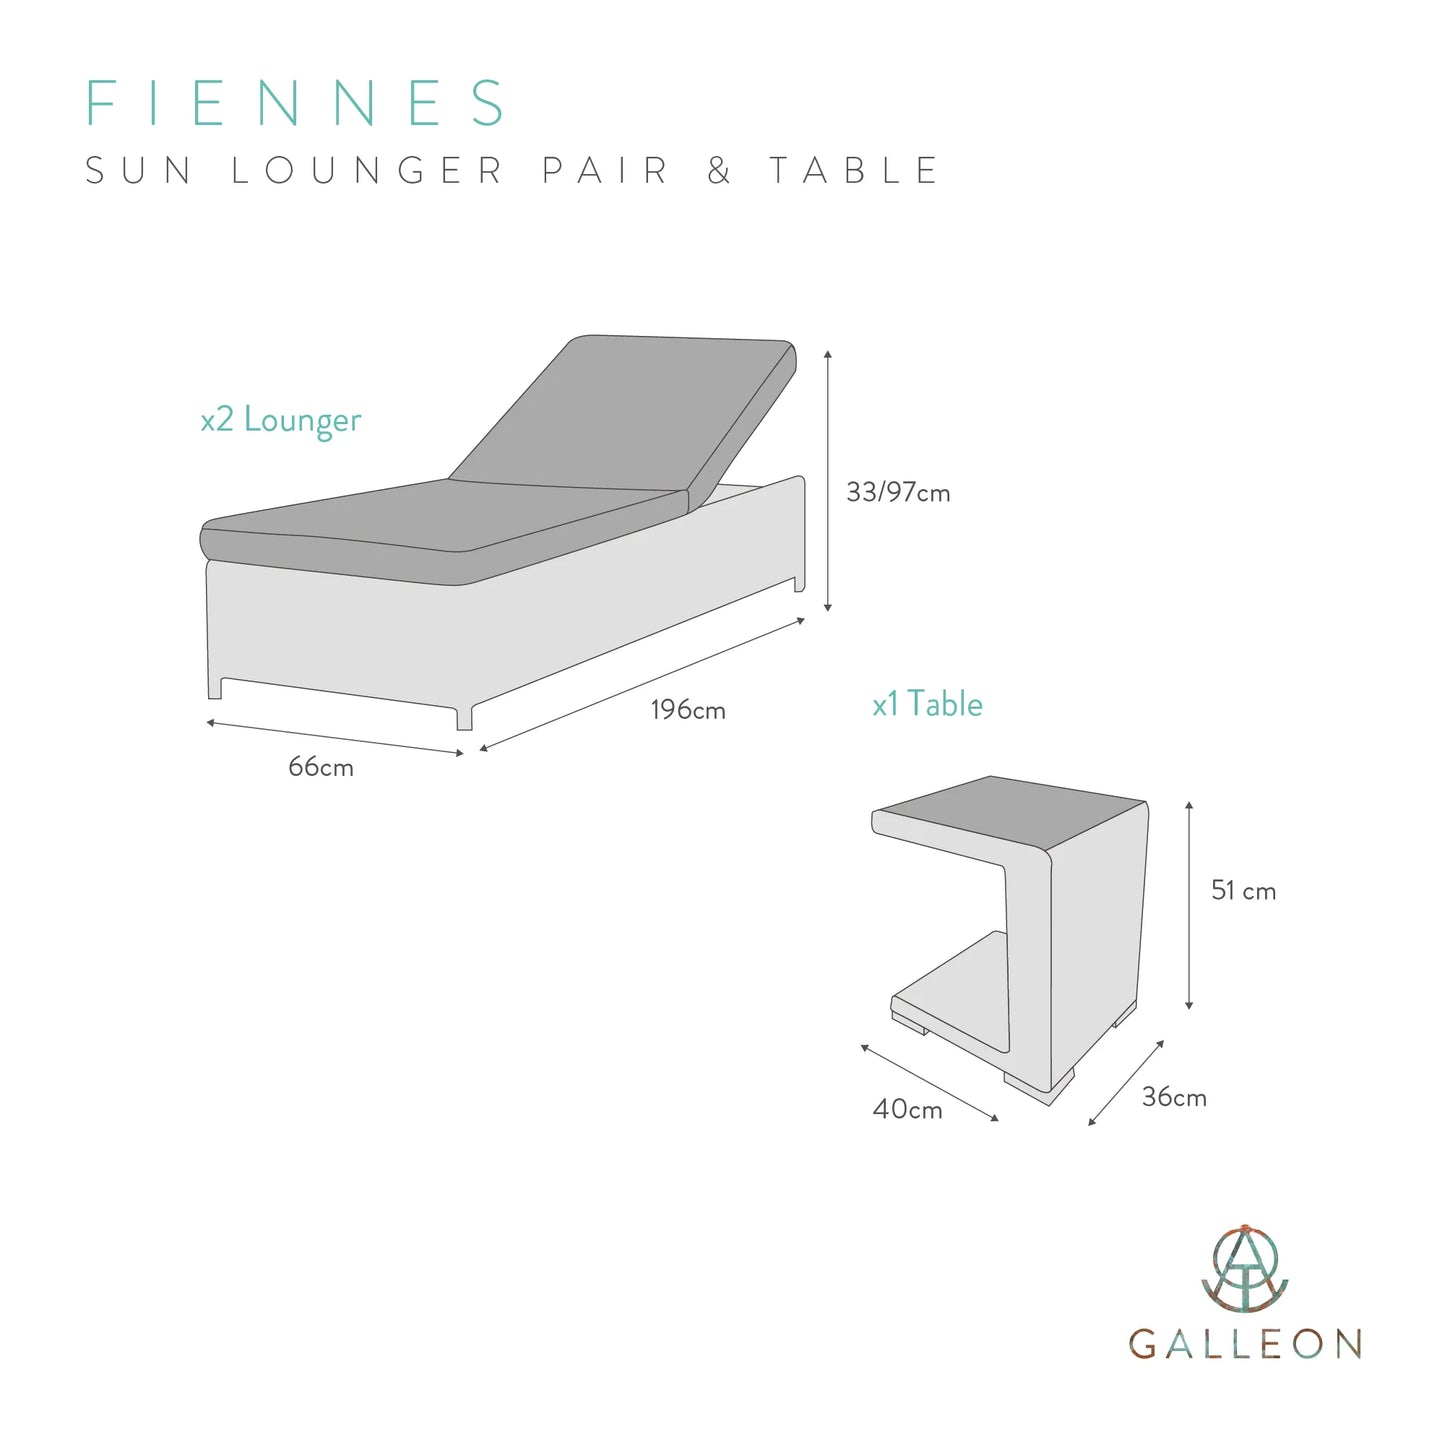 Galleon Fiennes Luxury Sun Lounger and Table Set FREE SHIPPING